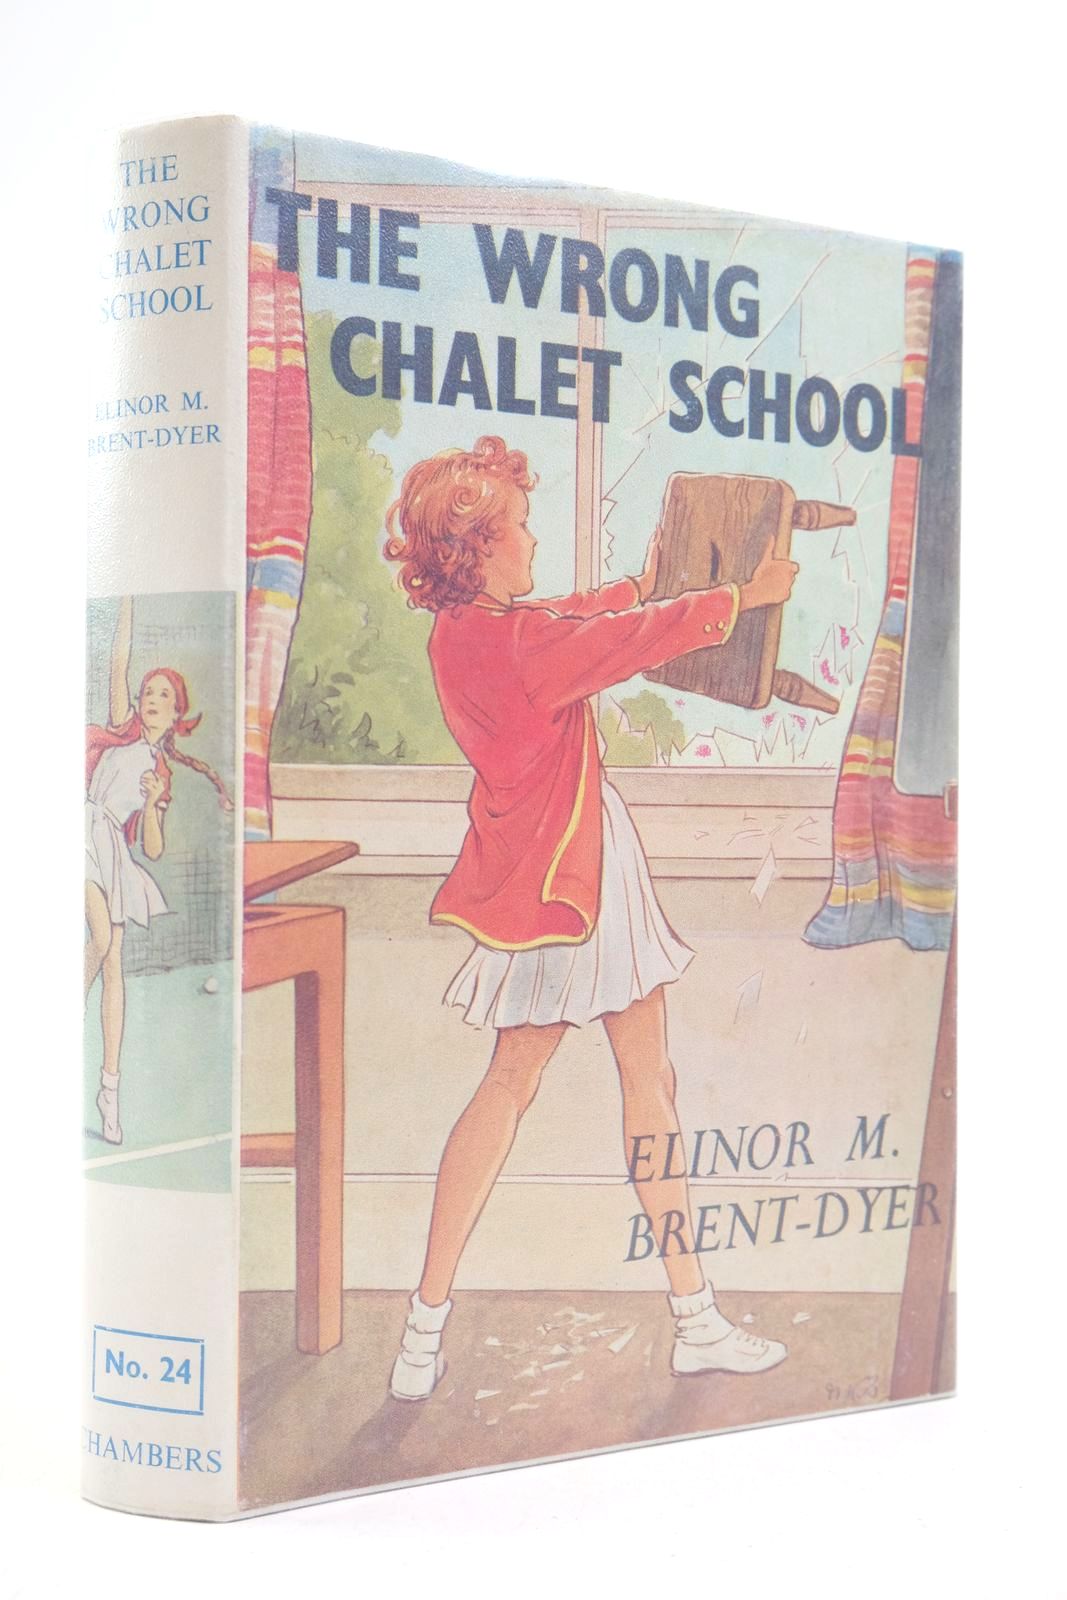 Photo of THE WRONG CHALET SCHOOL written by Brent-Dyer, Elinor M. illustrated by Brisley, Nina K. published by W. &amp; R. Chambers Limited (STOCK CODE: 2140020)  for sale by Stella & Rose's Books